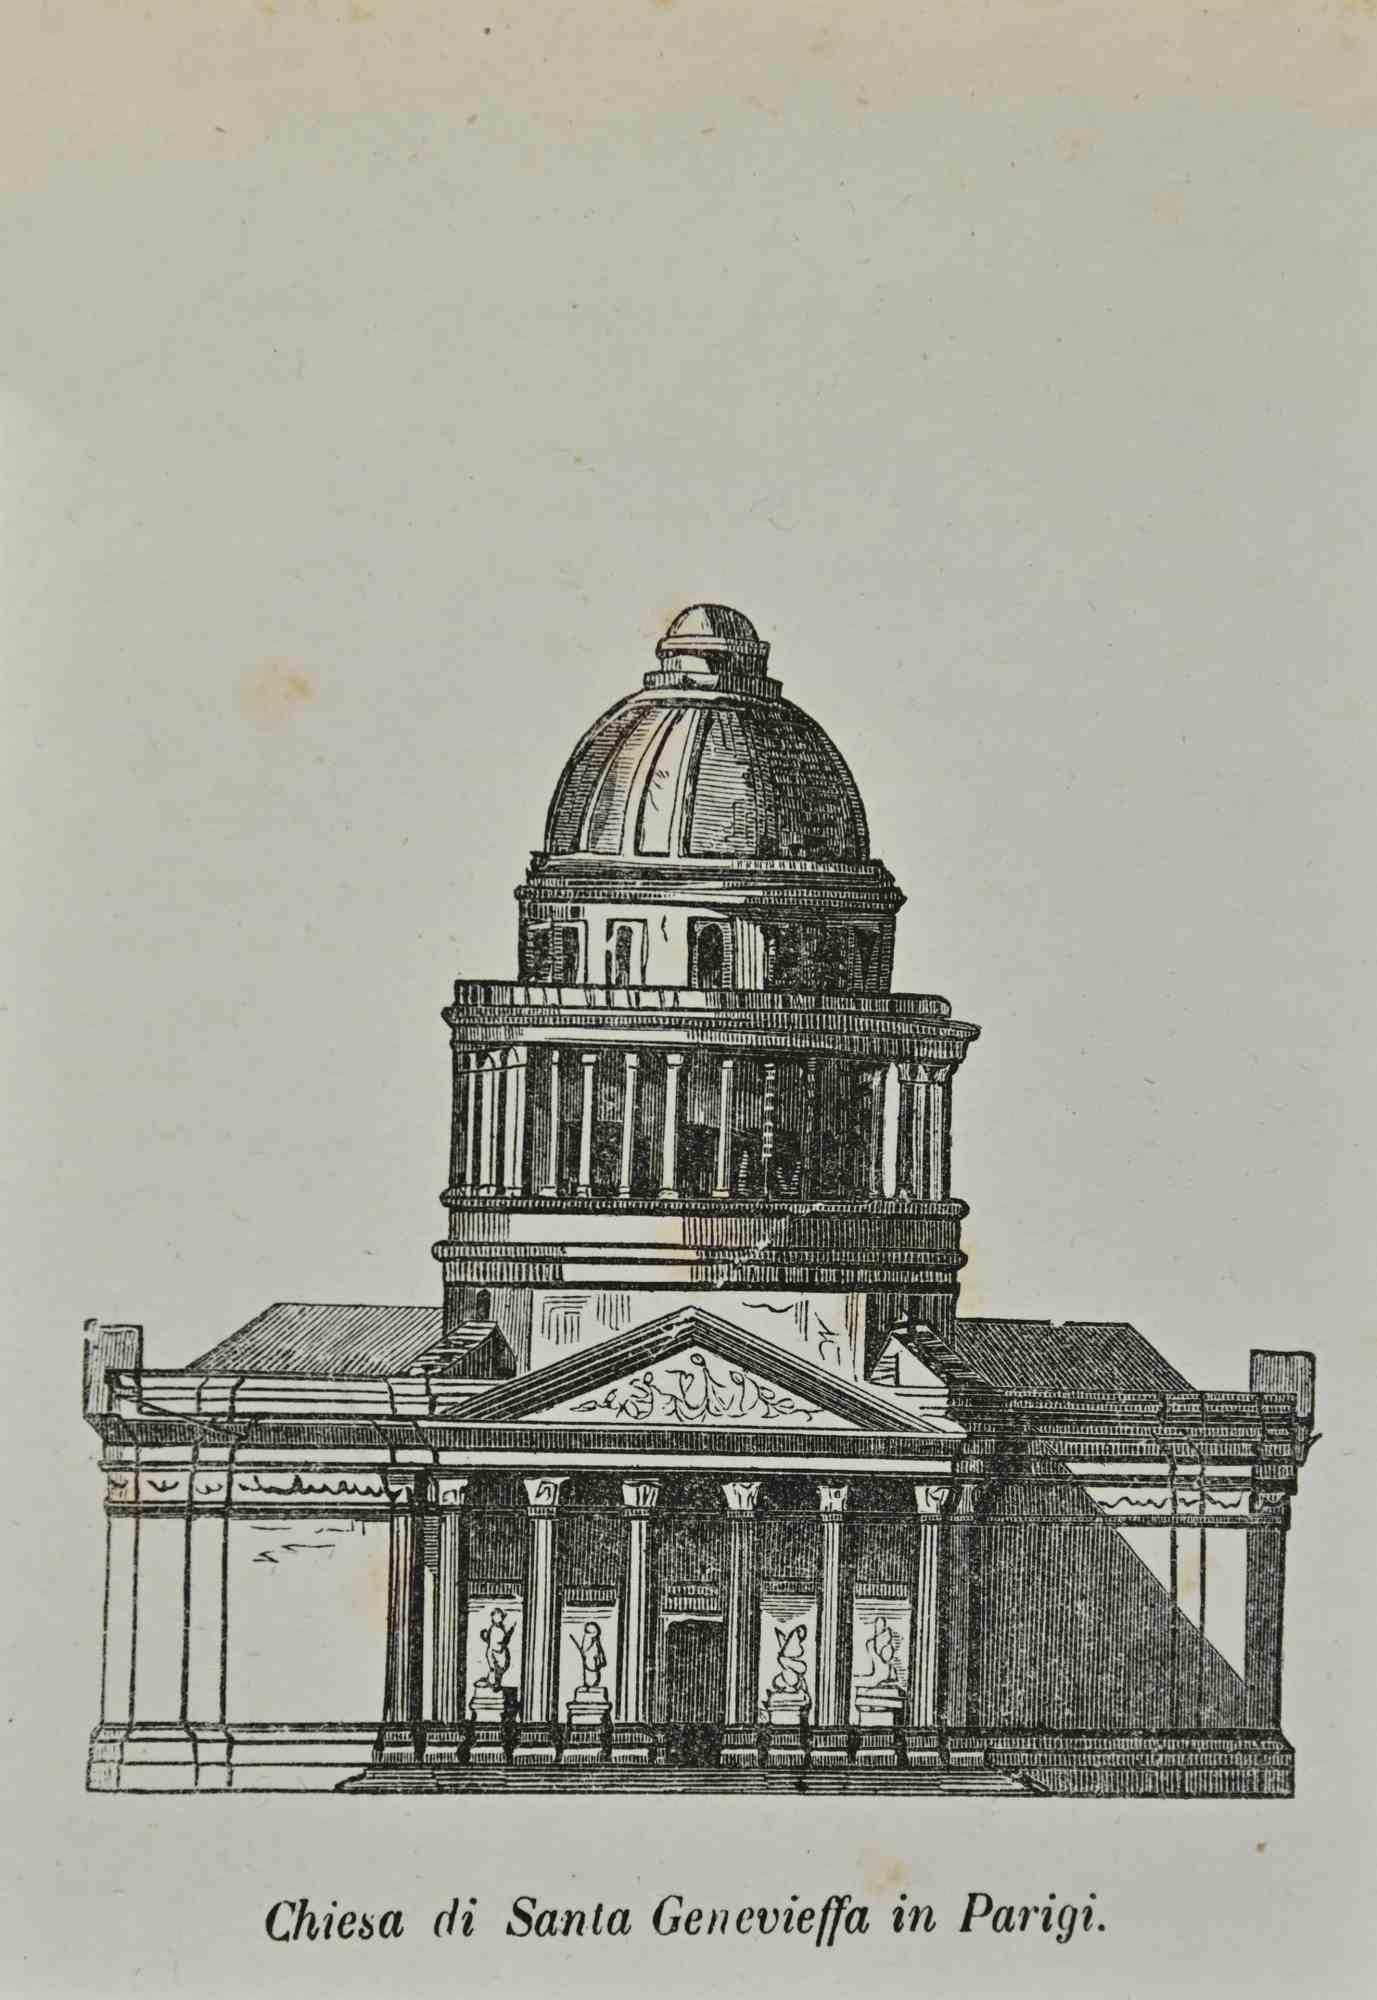 Church of Saint Genevieffa in Paris is a lithograph made by Auguste Wahlen in 1844.

Good condition.

Drawing in black and white.

At the center of the artwork is the original title "Chiesa di Santa Genevieffa in Parigi".

The work is part of Suite